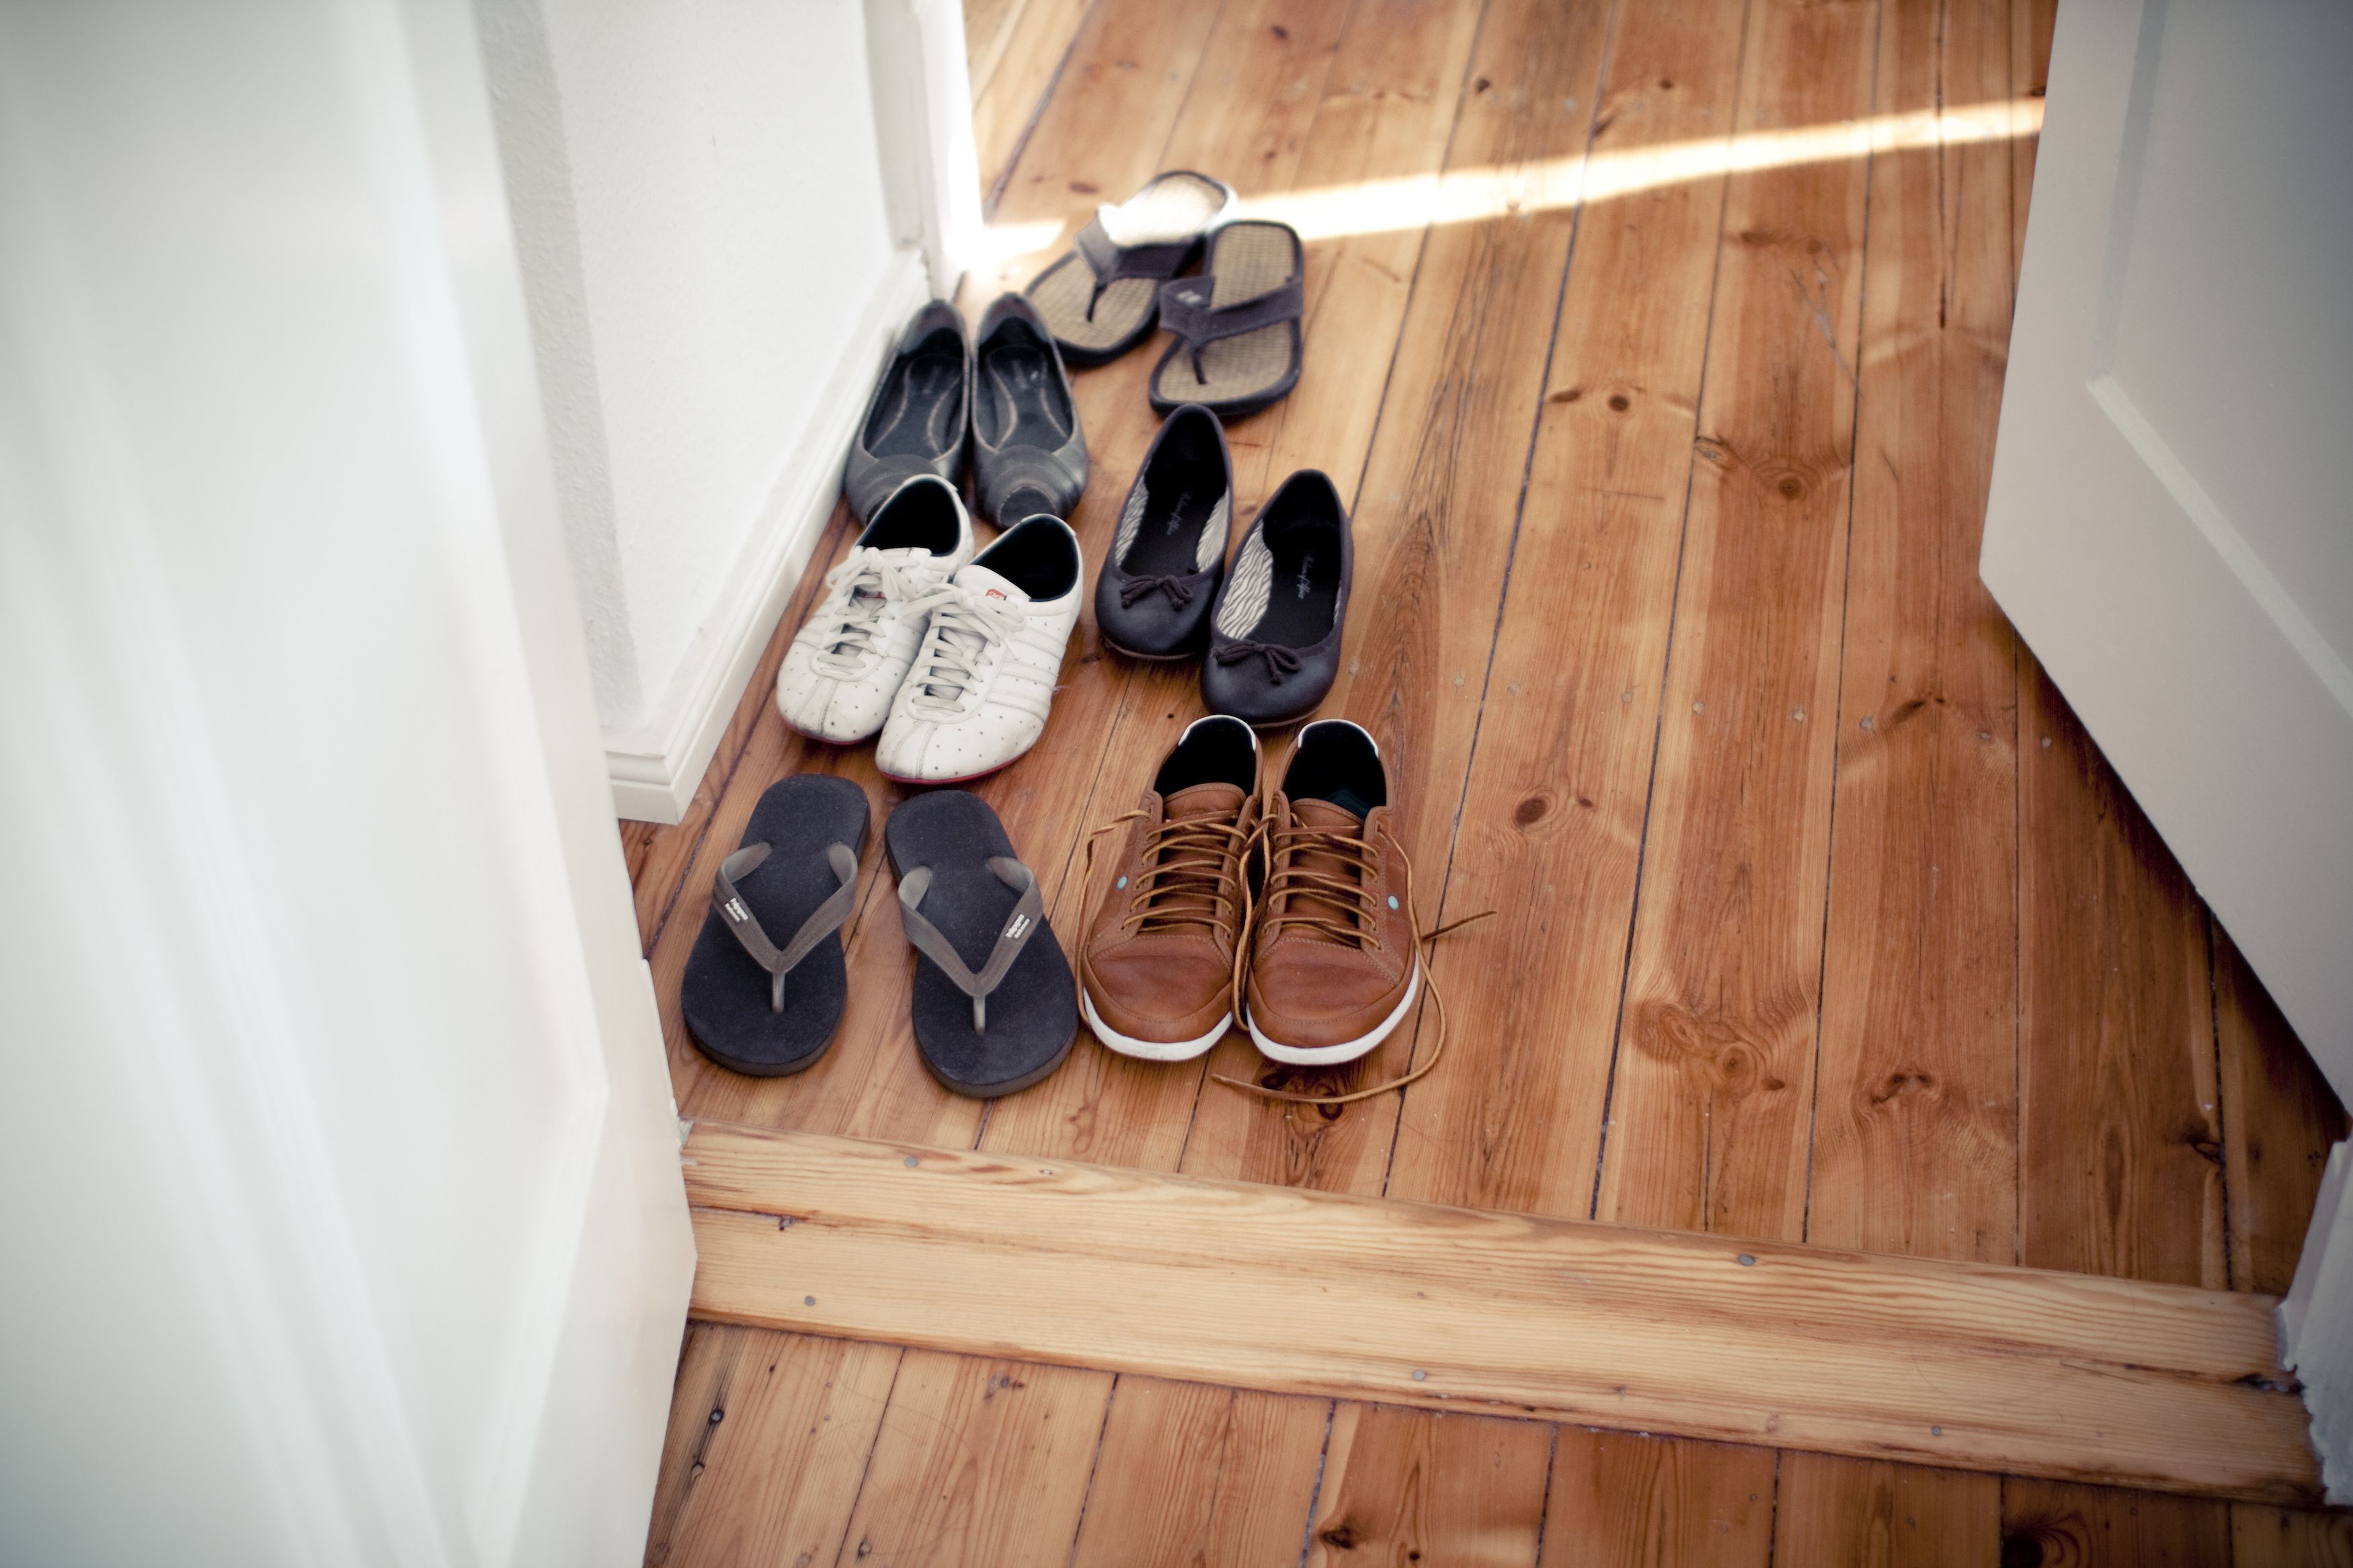 Should You Take Your Shoes Off Inside Someones Home?